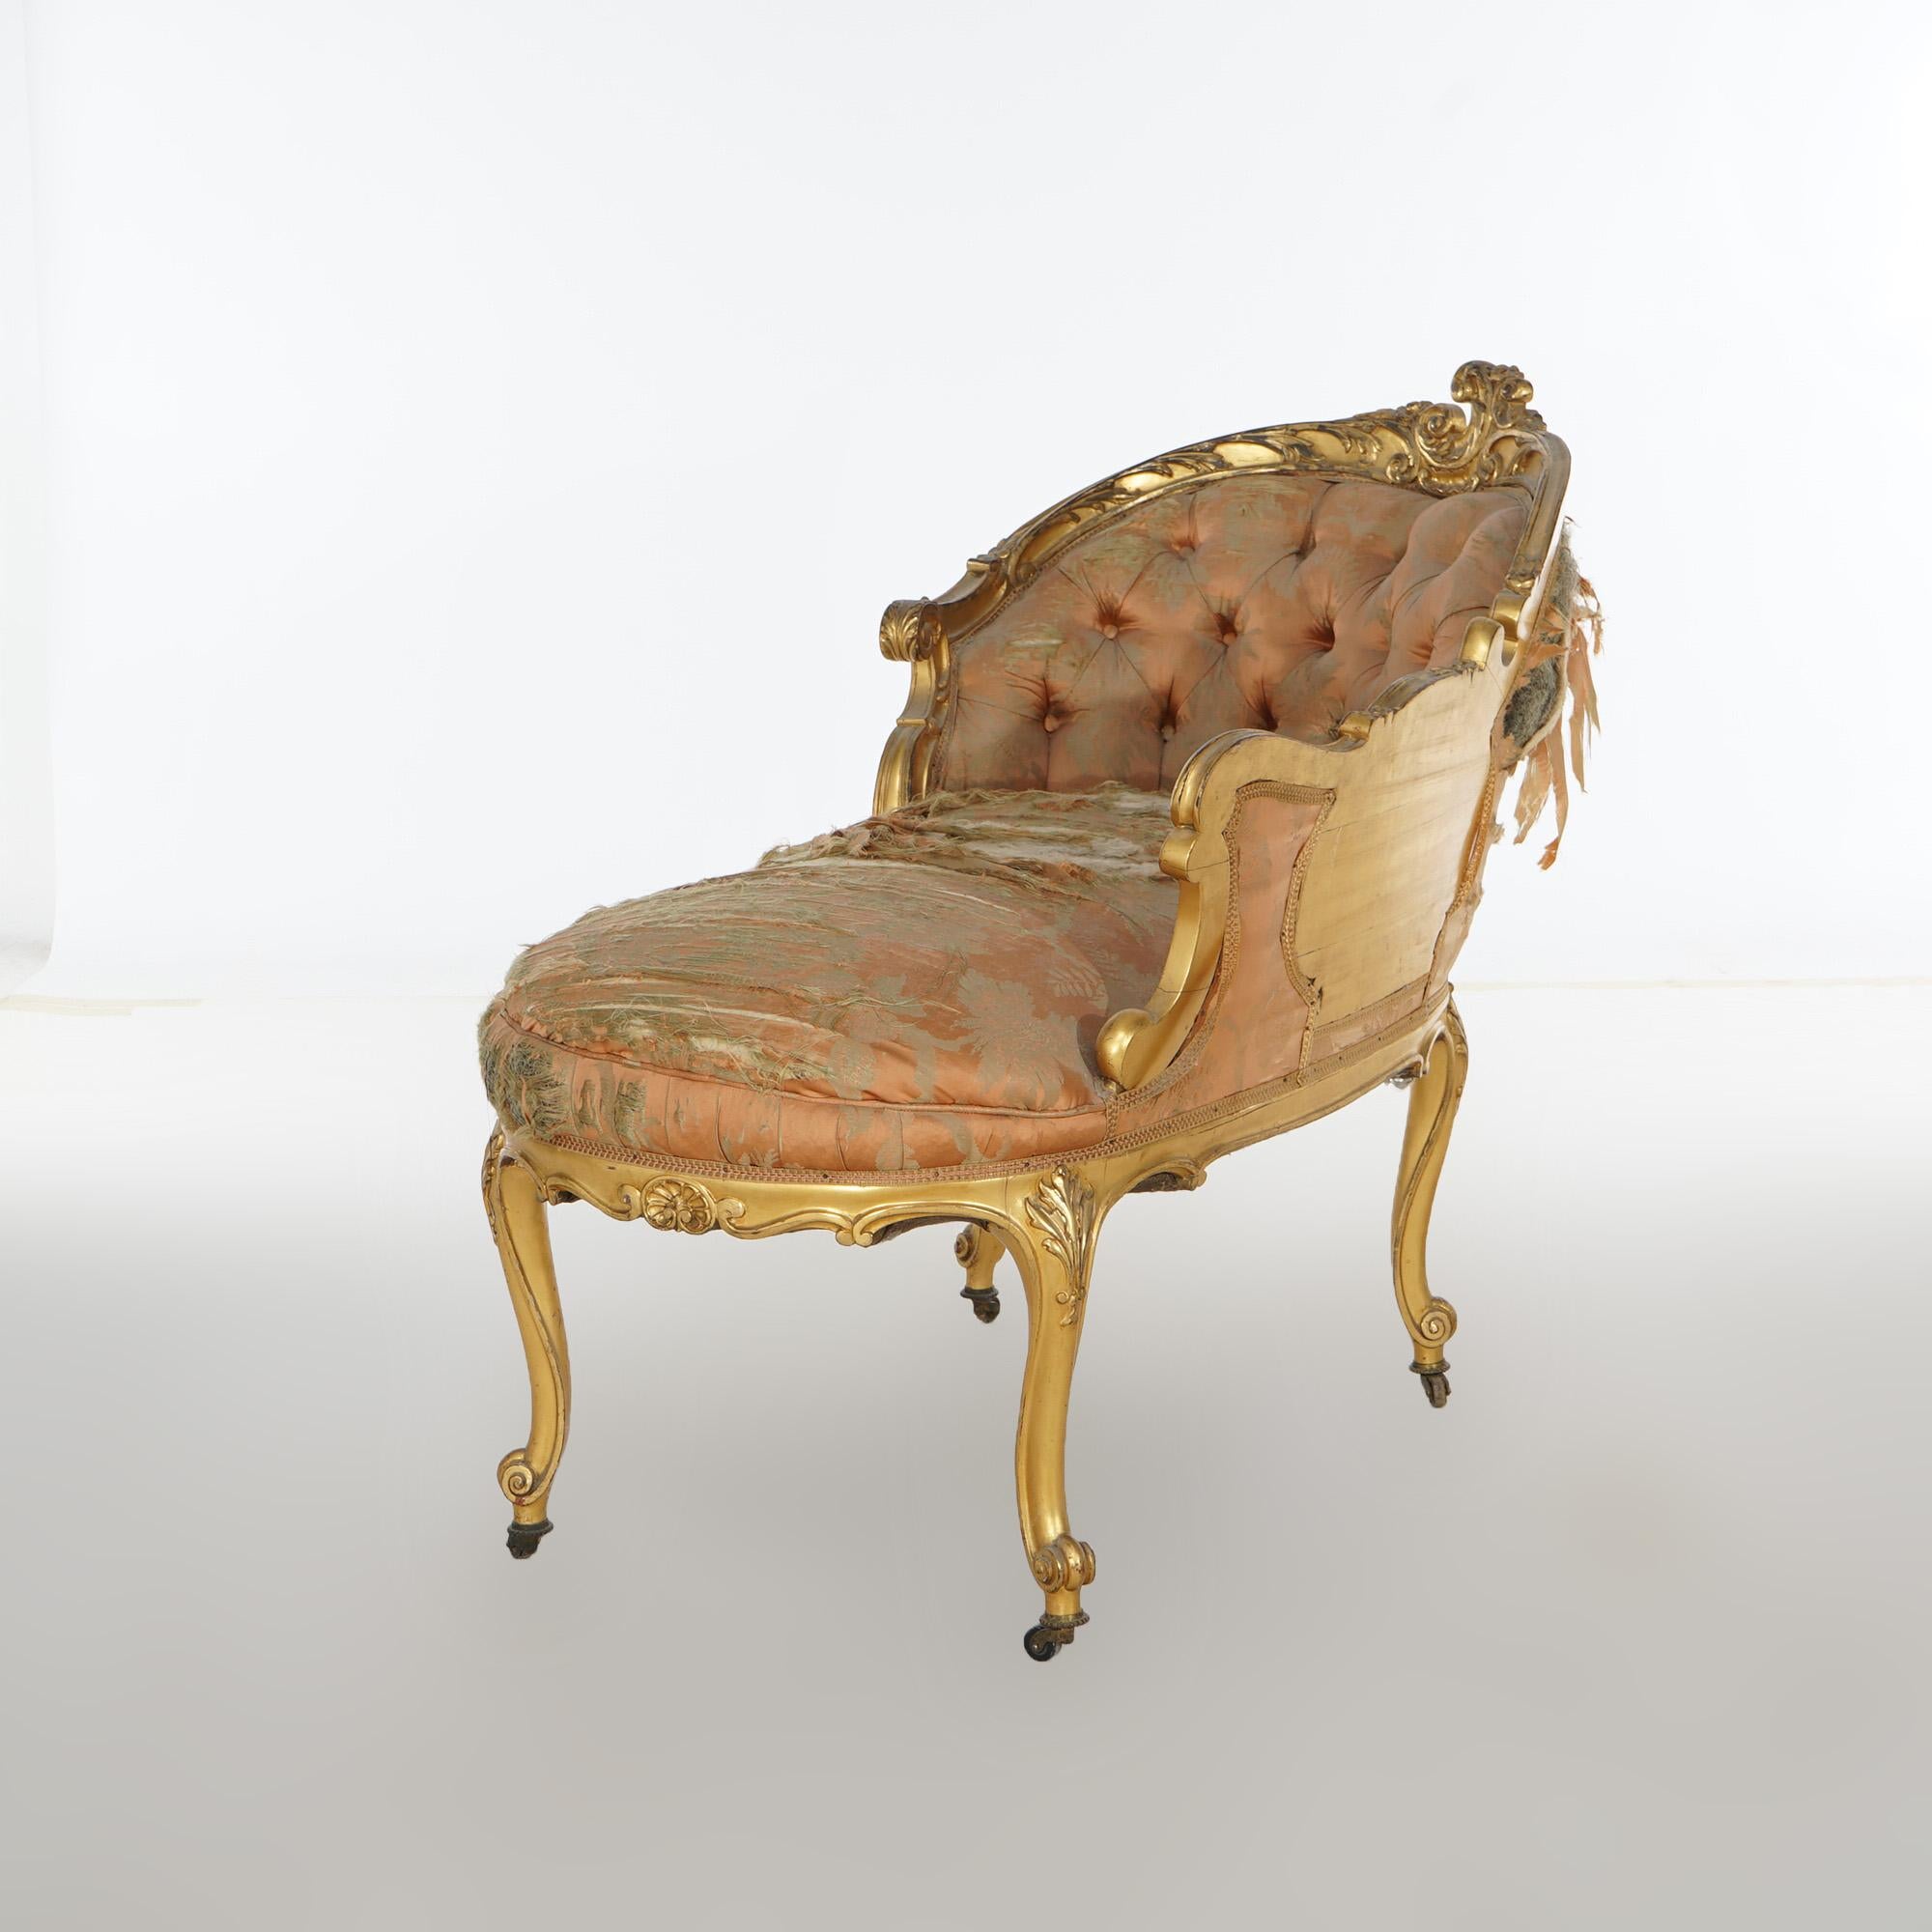 Early Antique French Rococo Vernis Martin & Giltwood Half-Recamier Settee 19th C For Sale 22